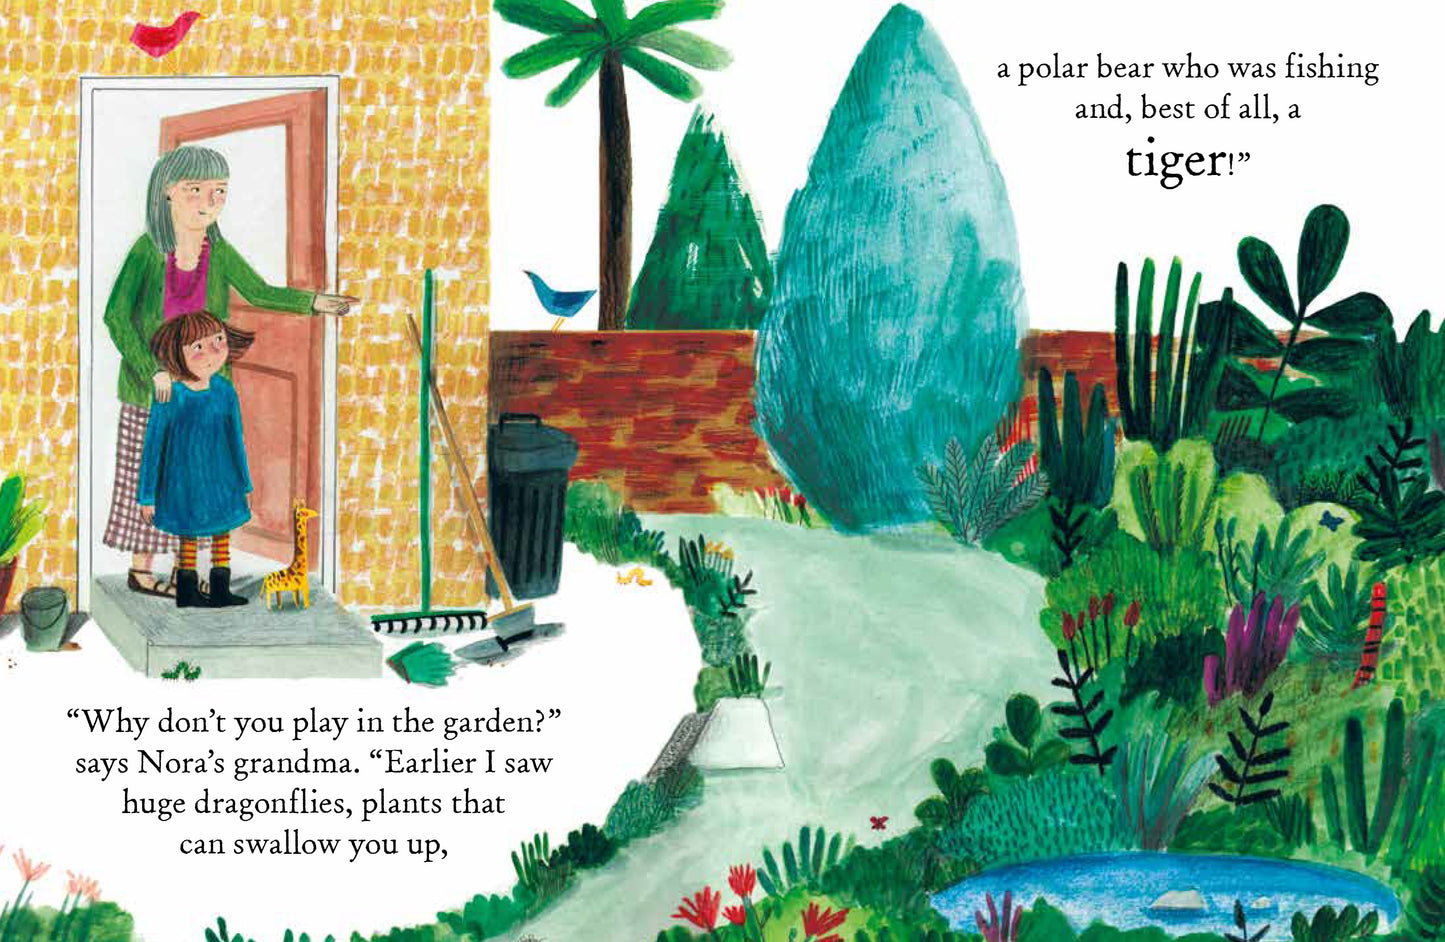 There's A Tiger in the Garden